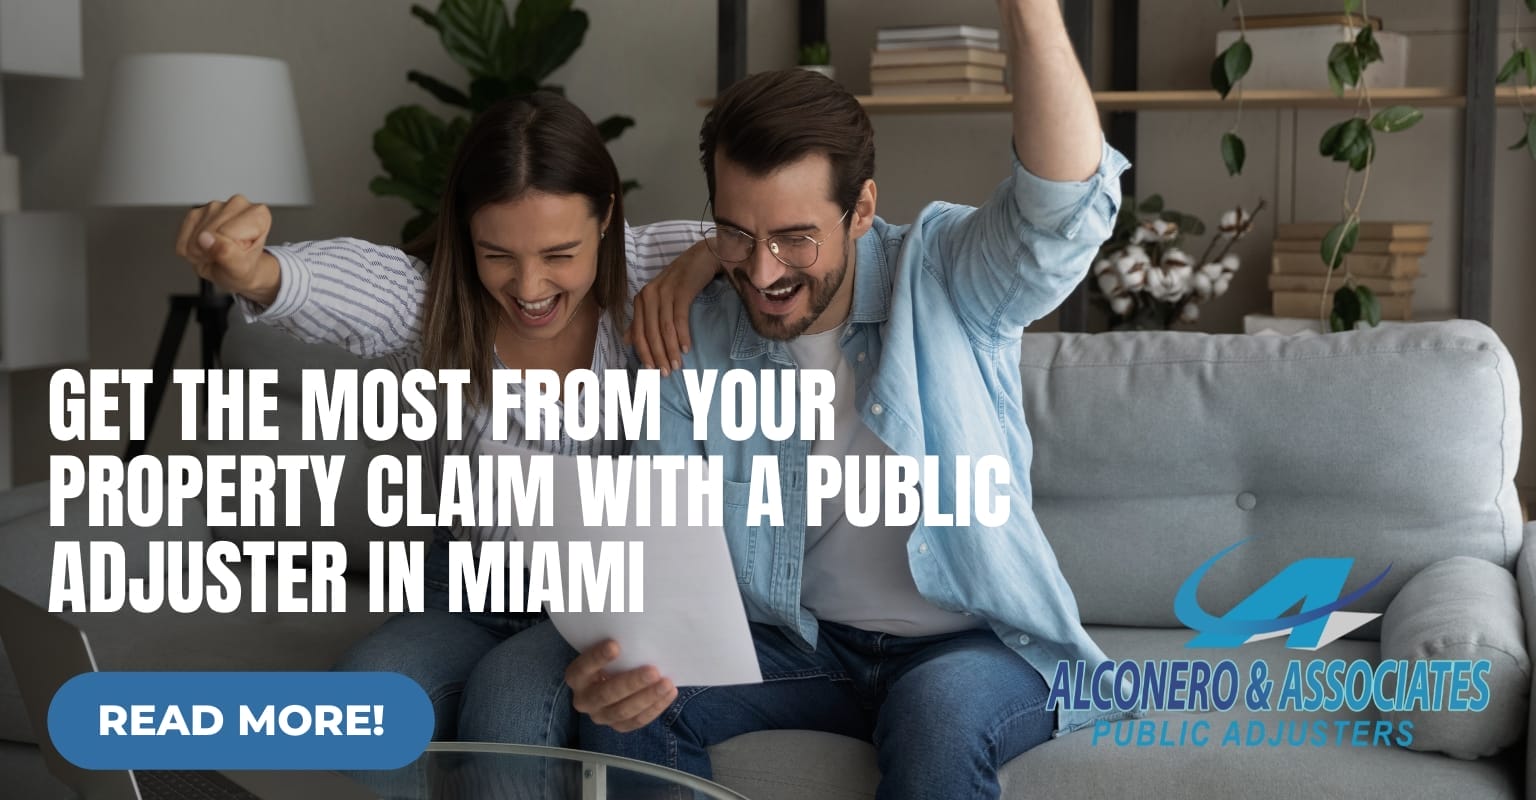 Get the Most from Your Property Claim with a Public Adjuster in Miami